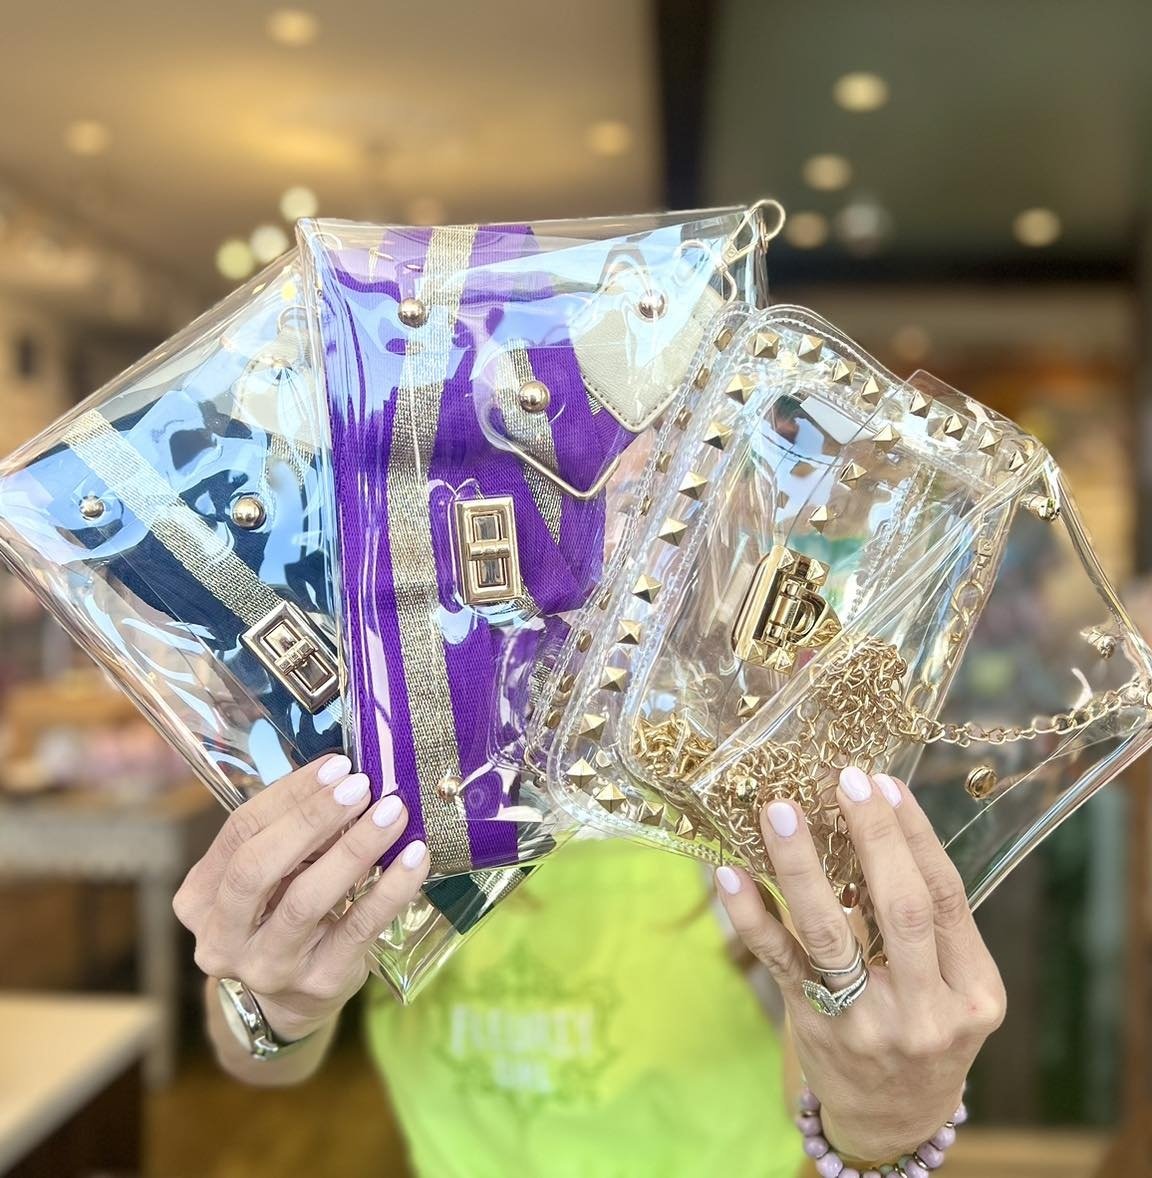 Stadium approved clear bag  Bags, Clear bags, Louis vuitton twist bag